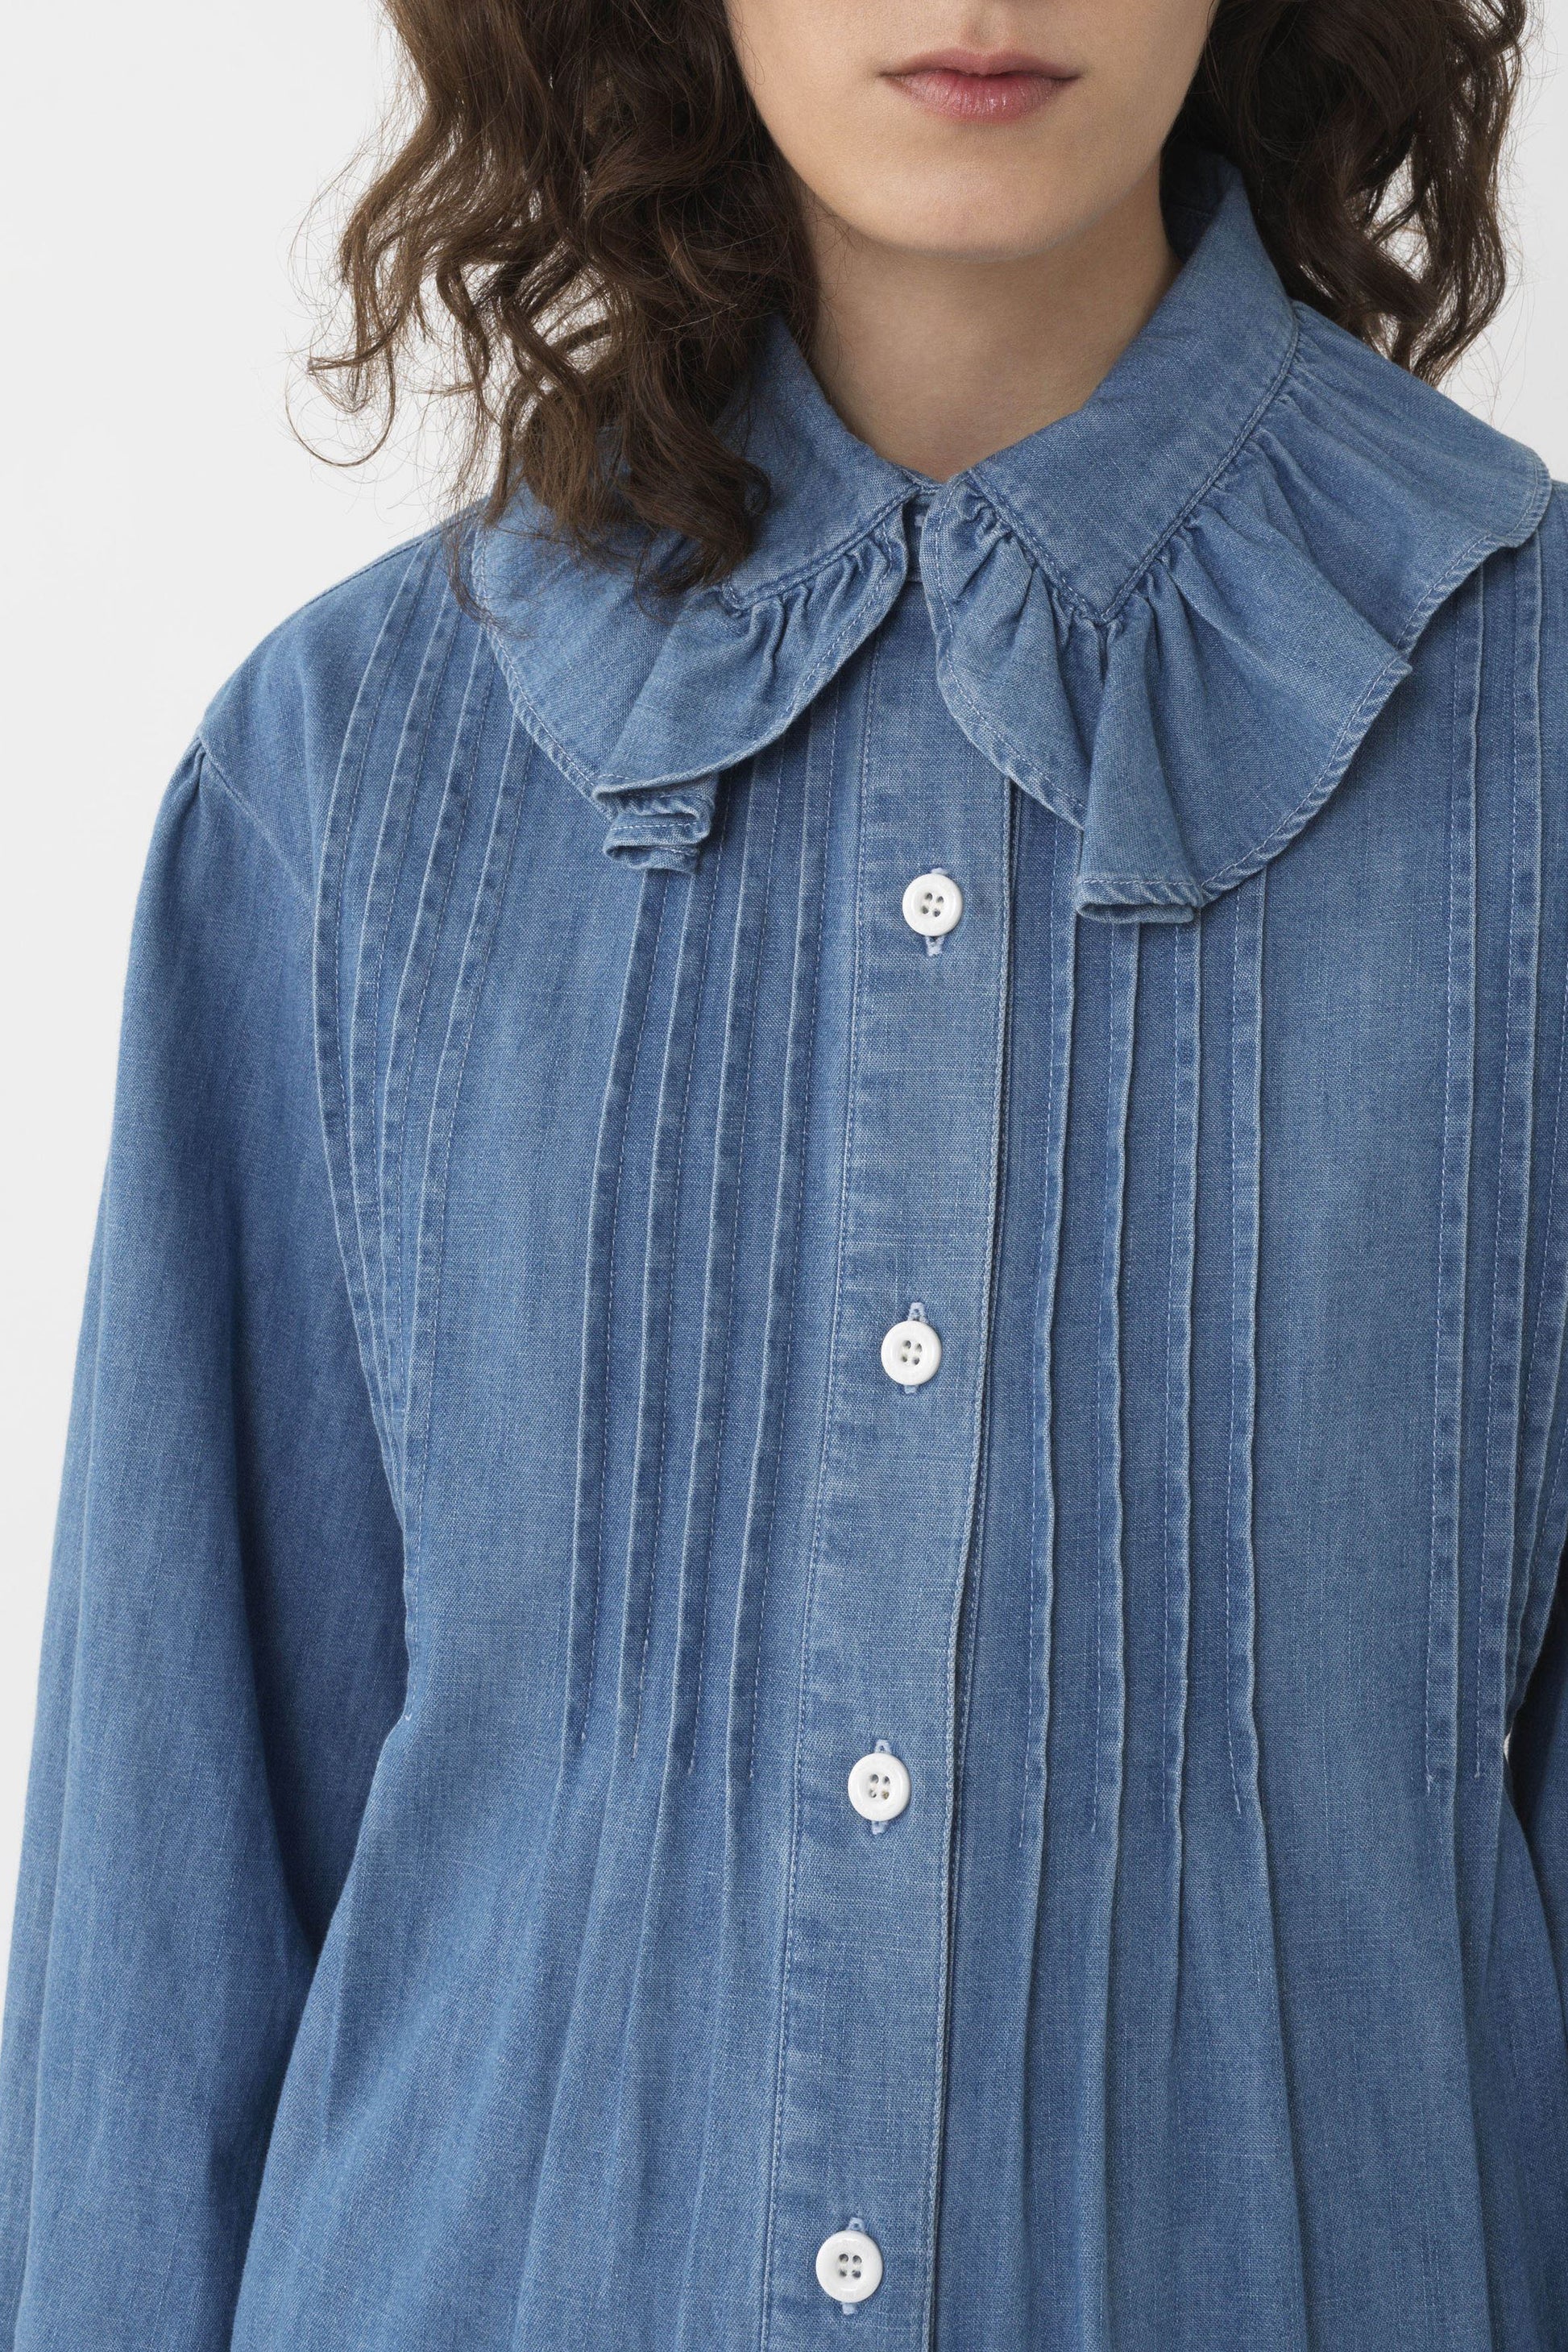 Jeansbluse in Eternal BlueSee by Chloé - Anita Hass